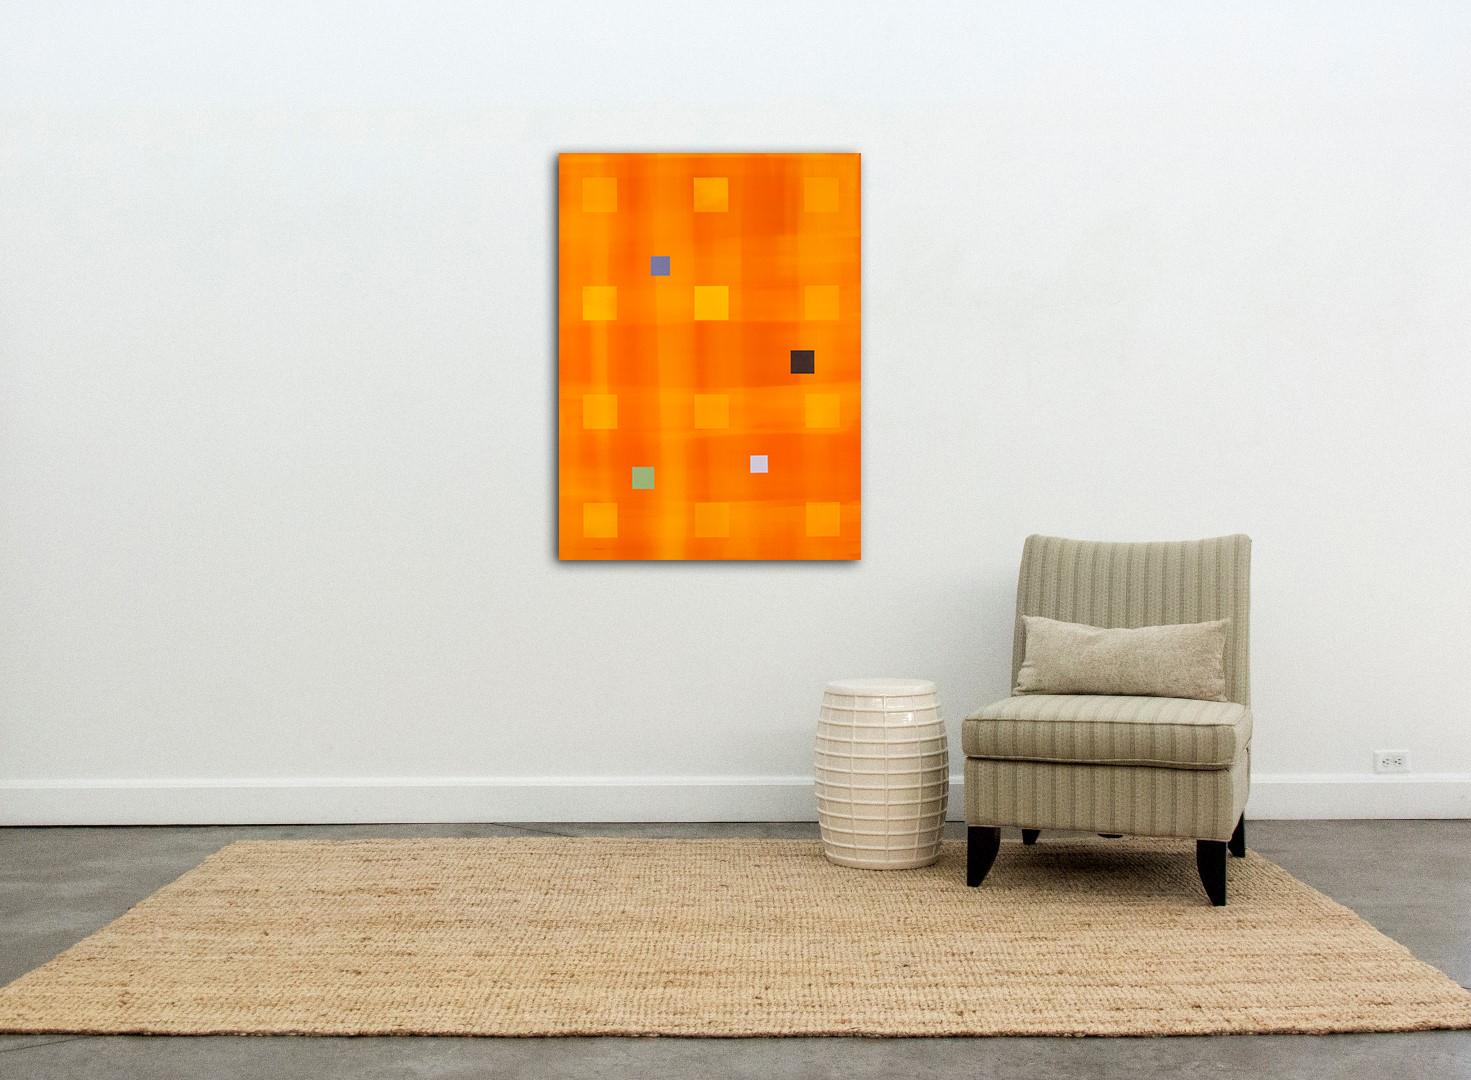 A loosely woven grid of brilliant orange and light orange acrylic soaks and spreads quietly across the ground of this vertical canvas. Pinned to this grid are twelve regimented, translucent, light orange squares that are interrupted by four smaller,